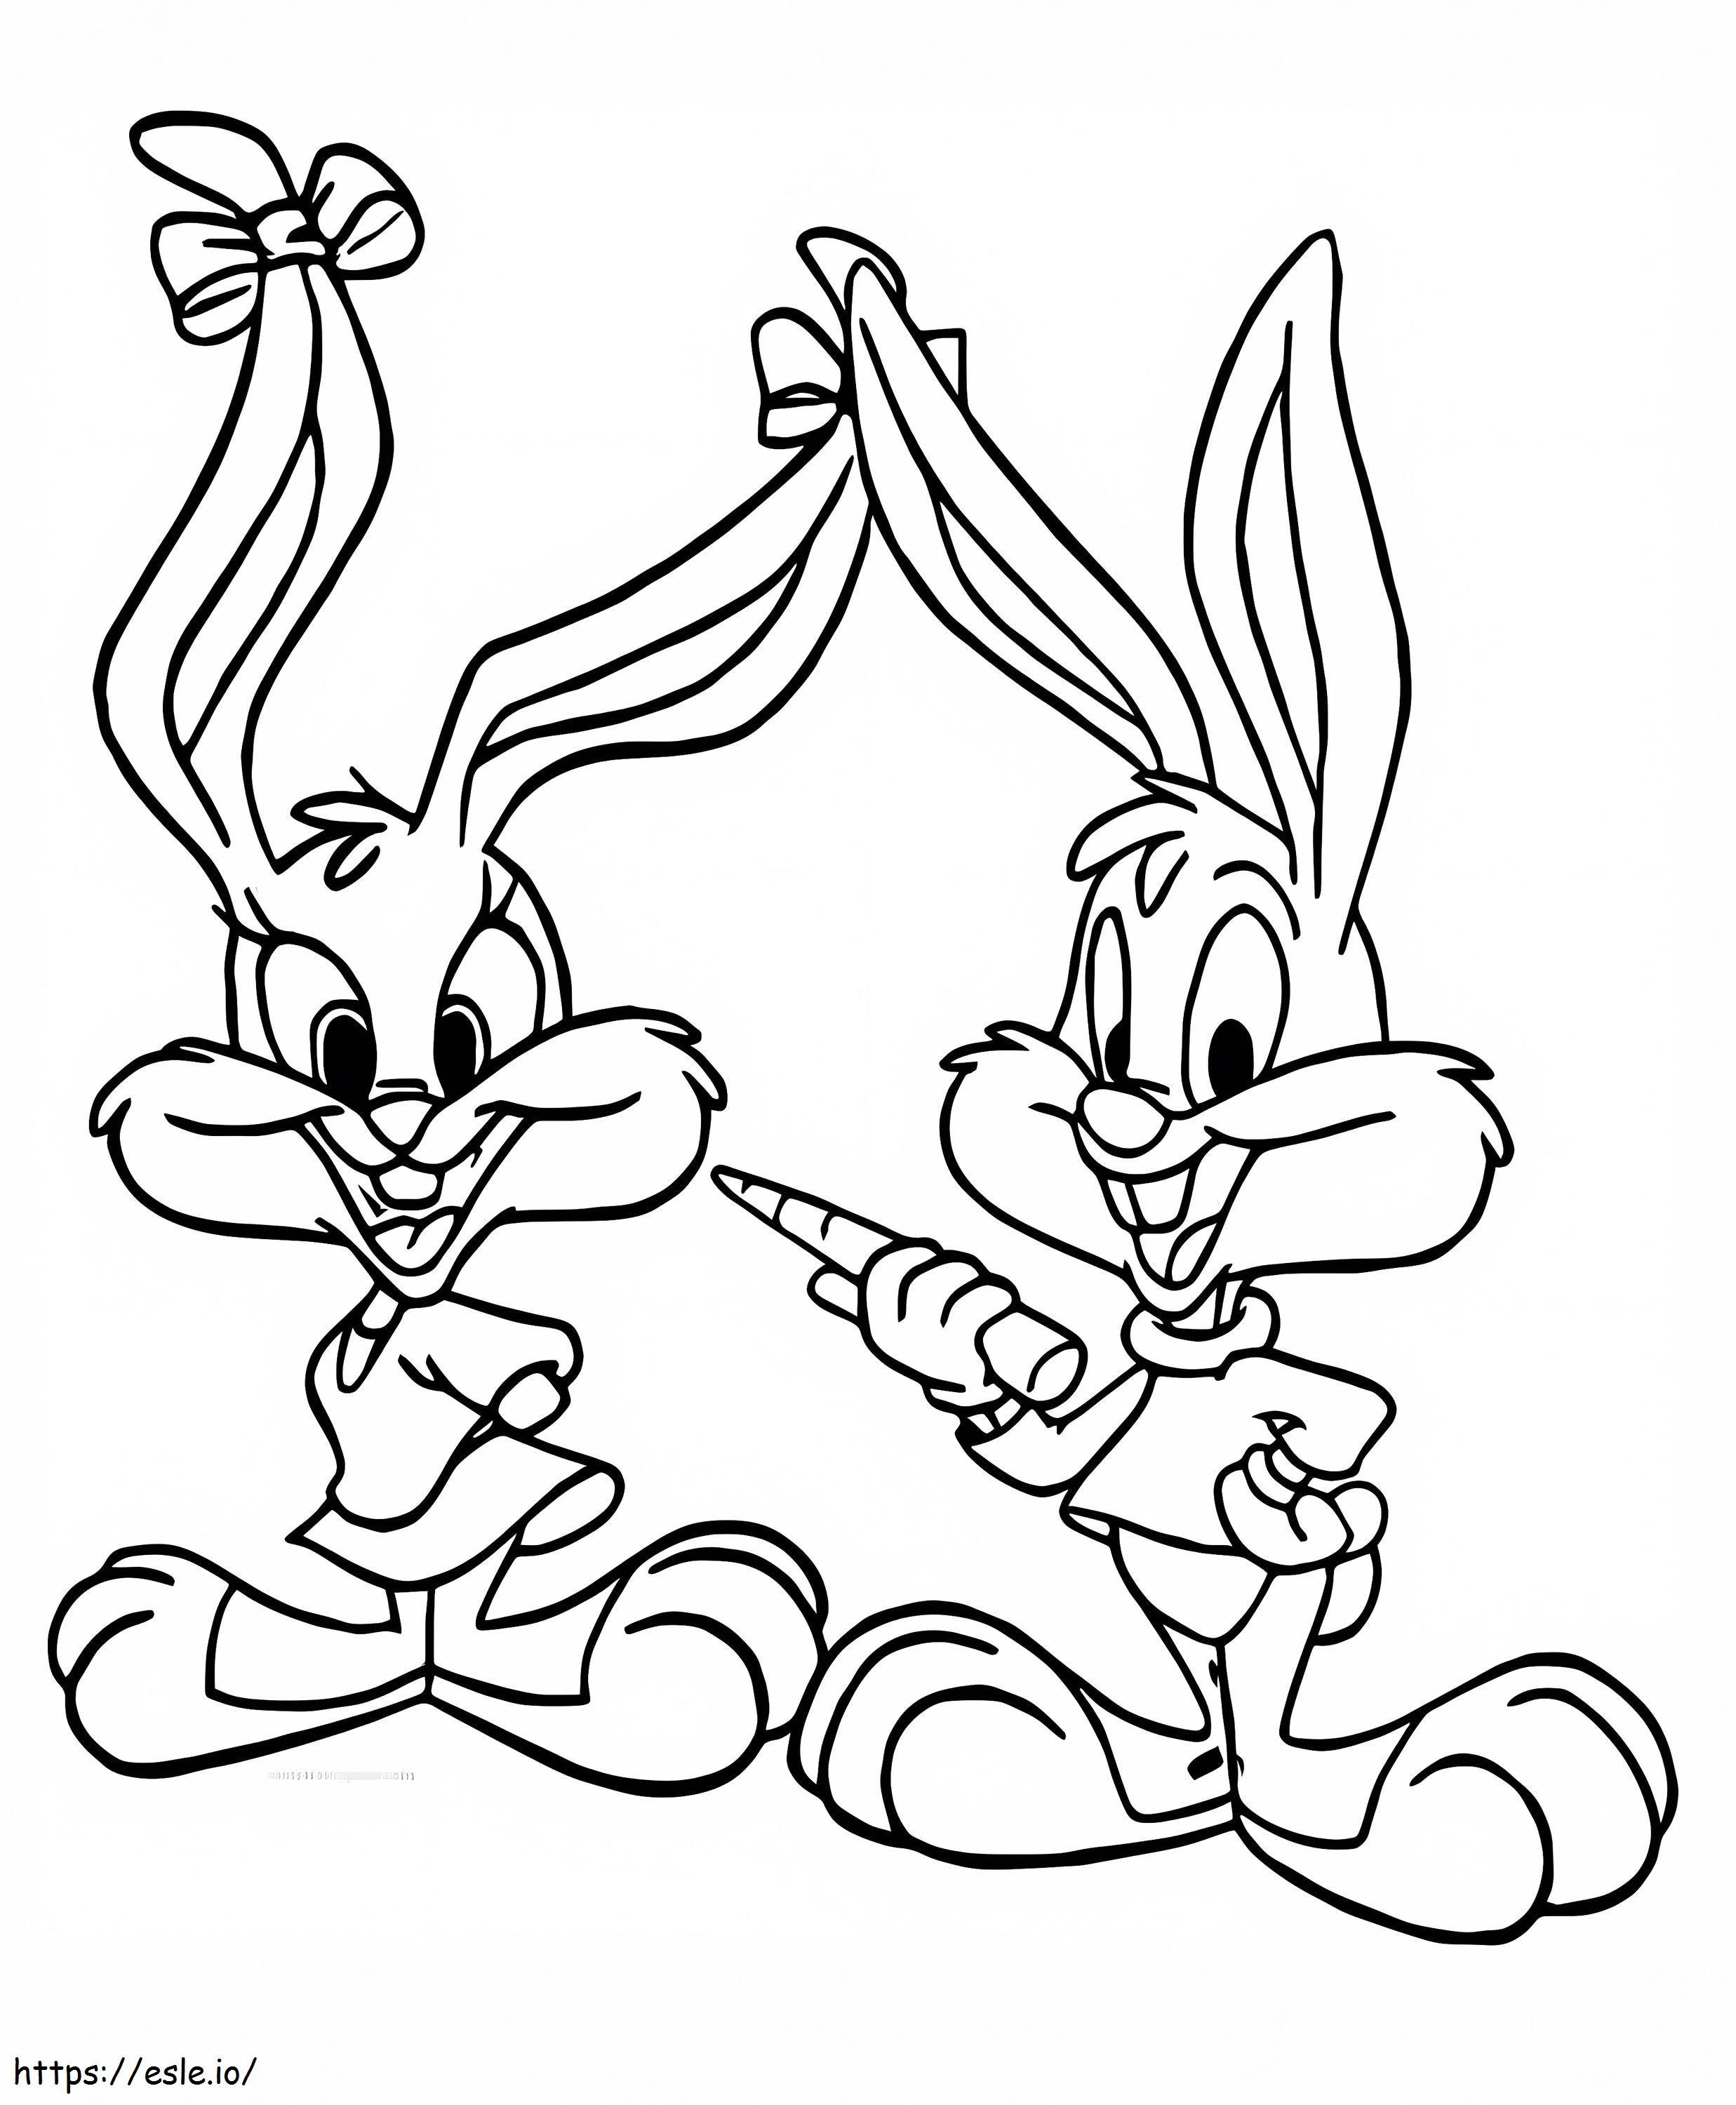 Babs Bunny And Buster Bunny coloring page